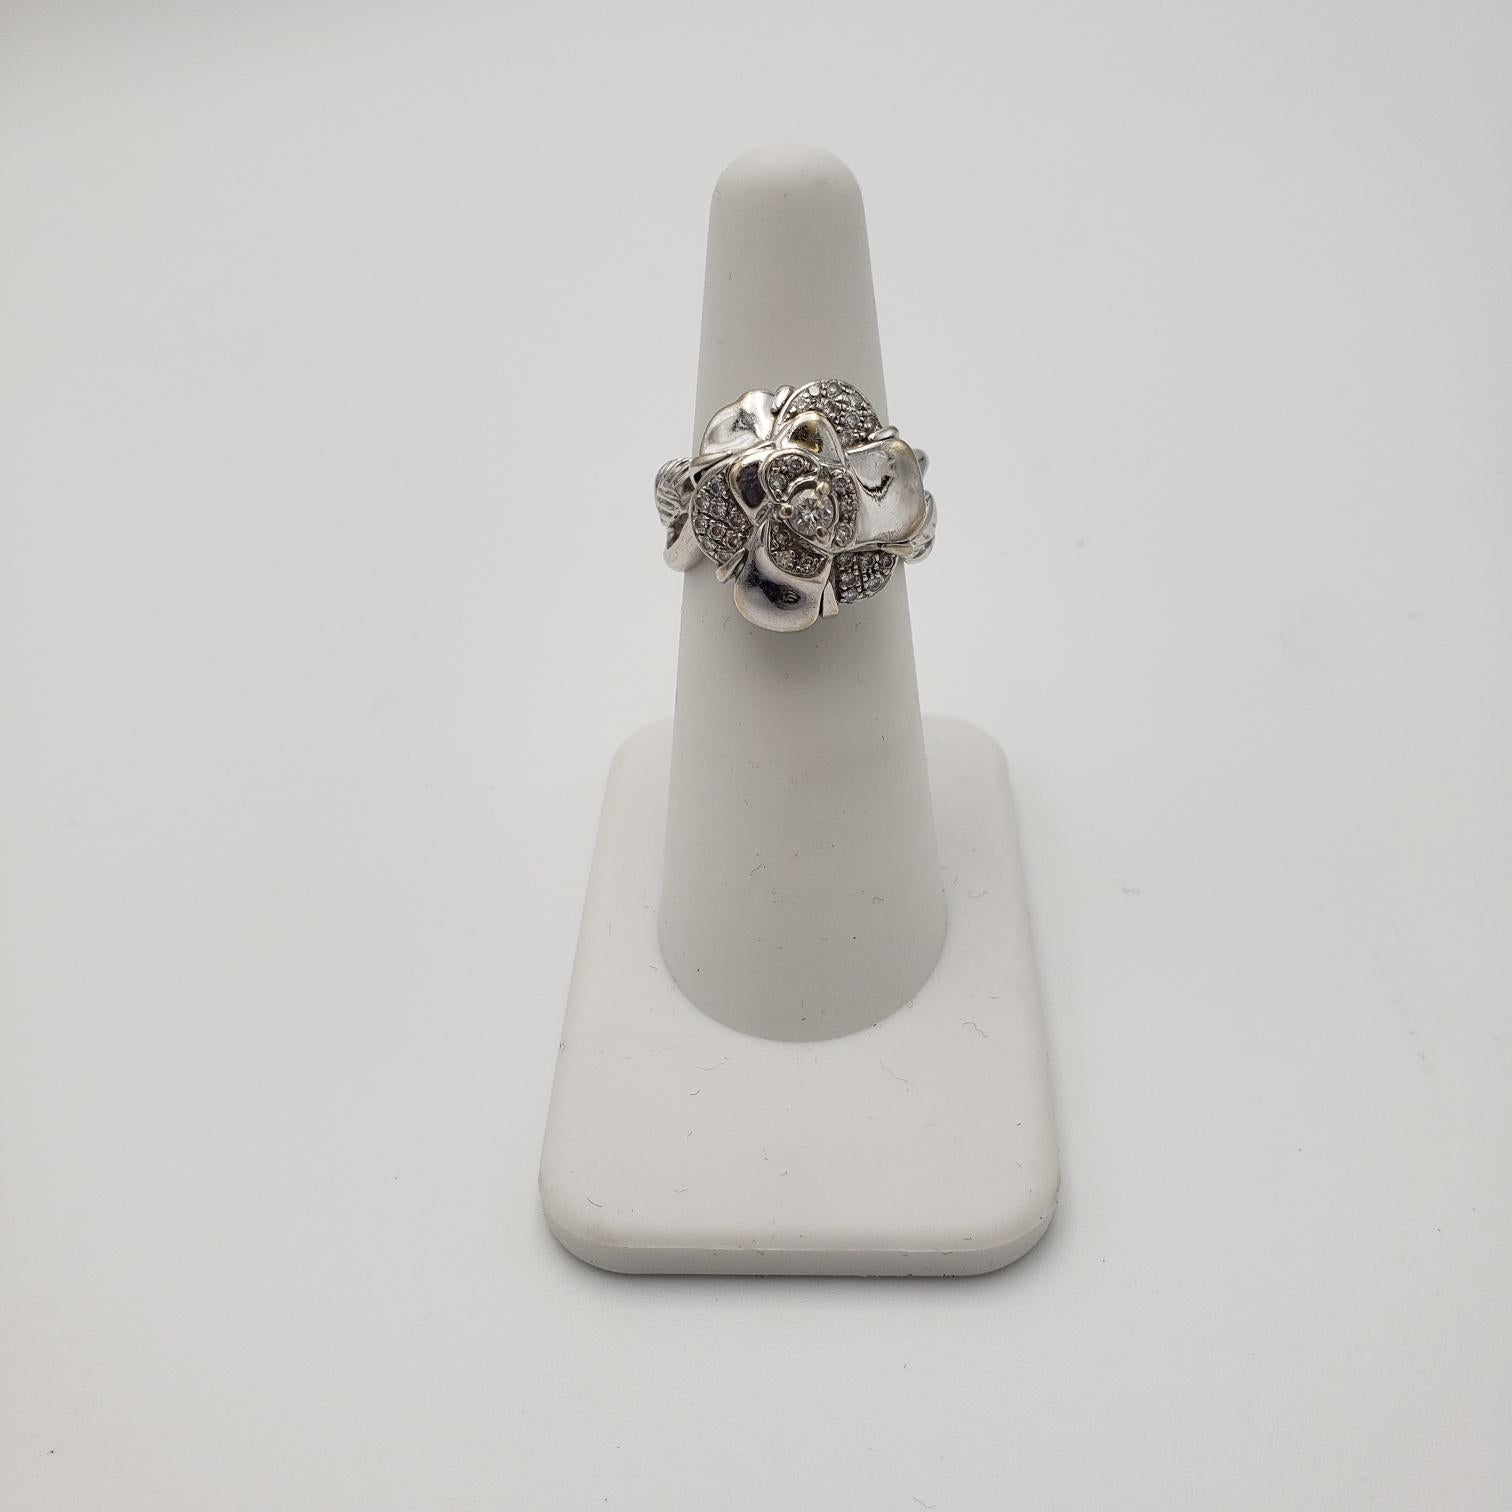 Authentic Chanel 'Camillia' flower ring crafted in 18 karat white gold and set with an estimated 0.40 carats of round brilliant cut diamonds. Signed Chanel, 91, 872, 750. Ring size 5 3/4. Not presented with original box or papers. CIRCA 2010s. 